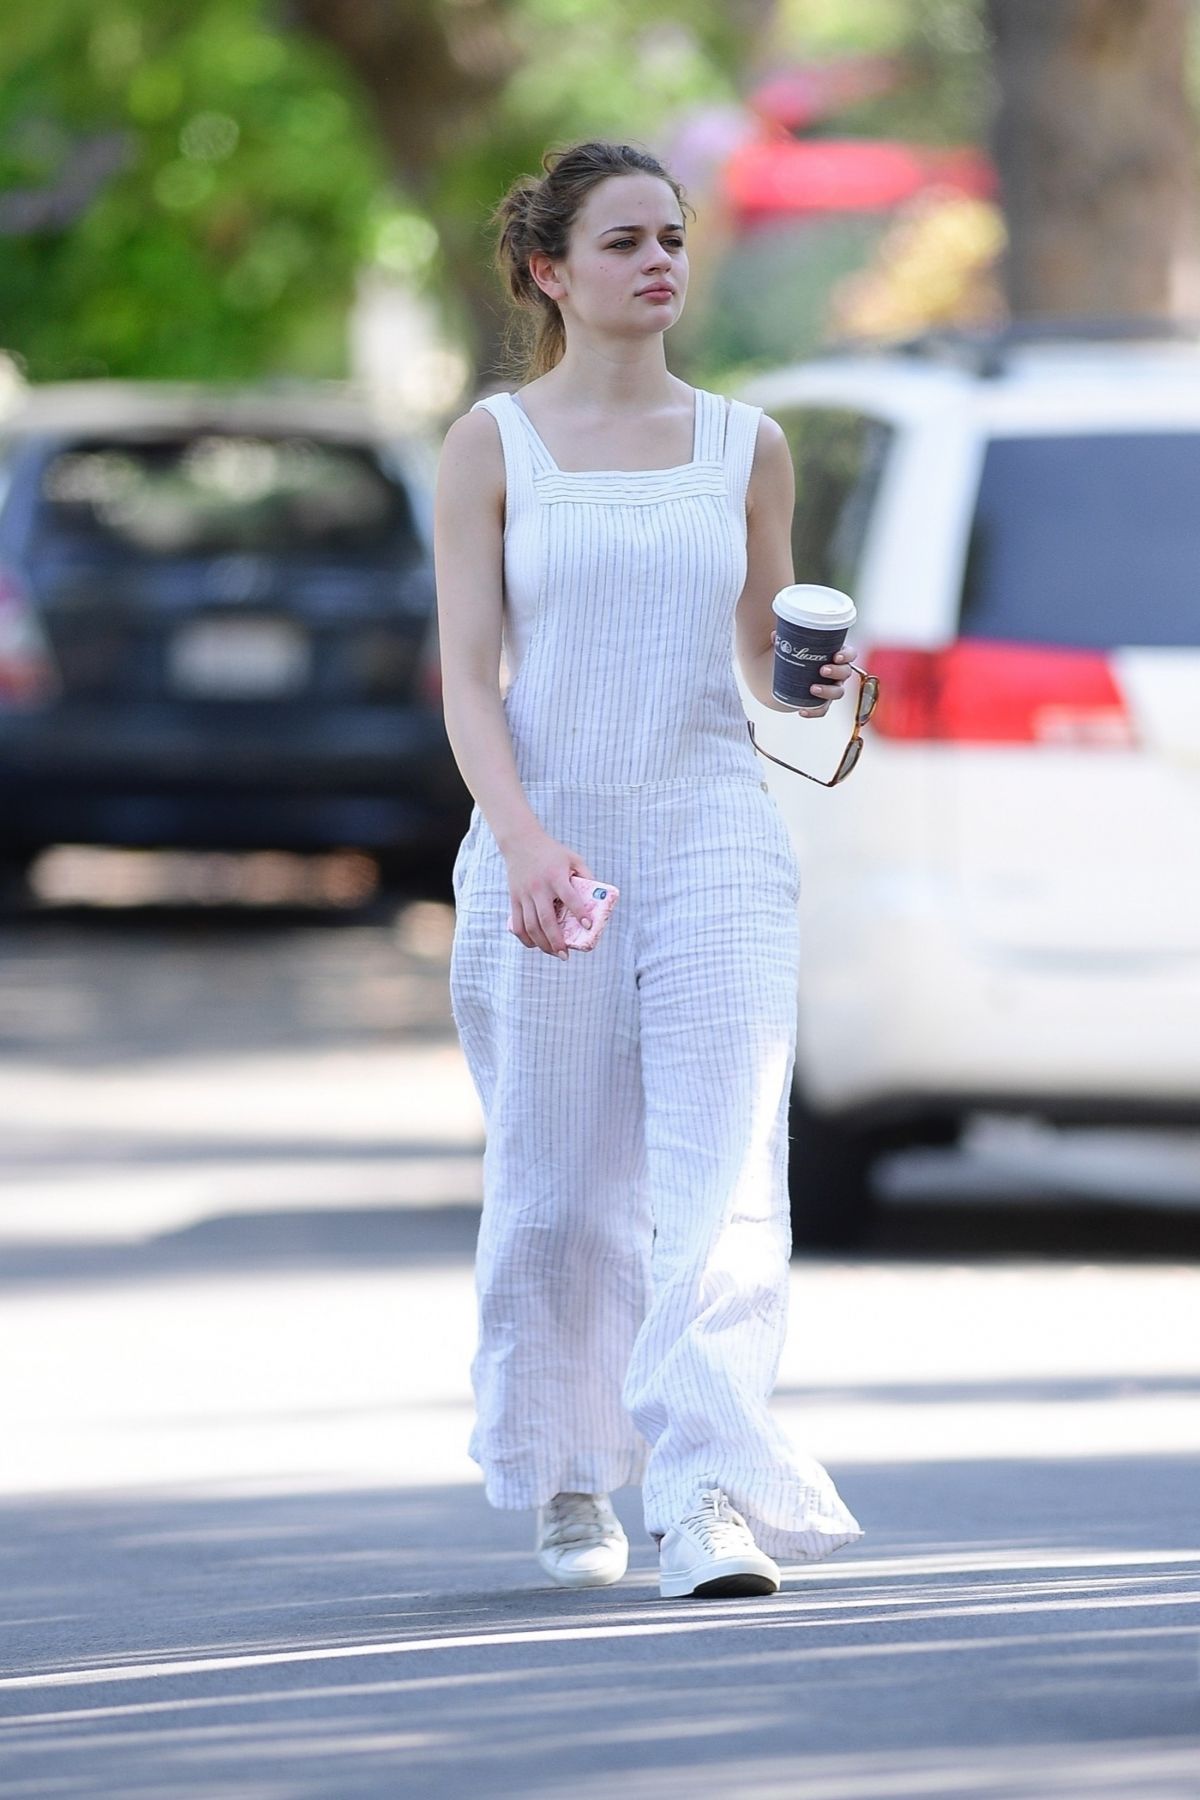 Joey King Out for Coffee in Los Angeles 2020/06/11